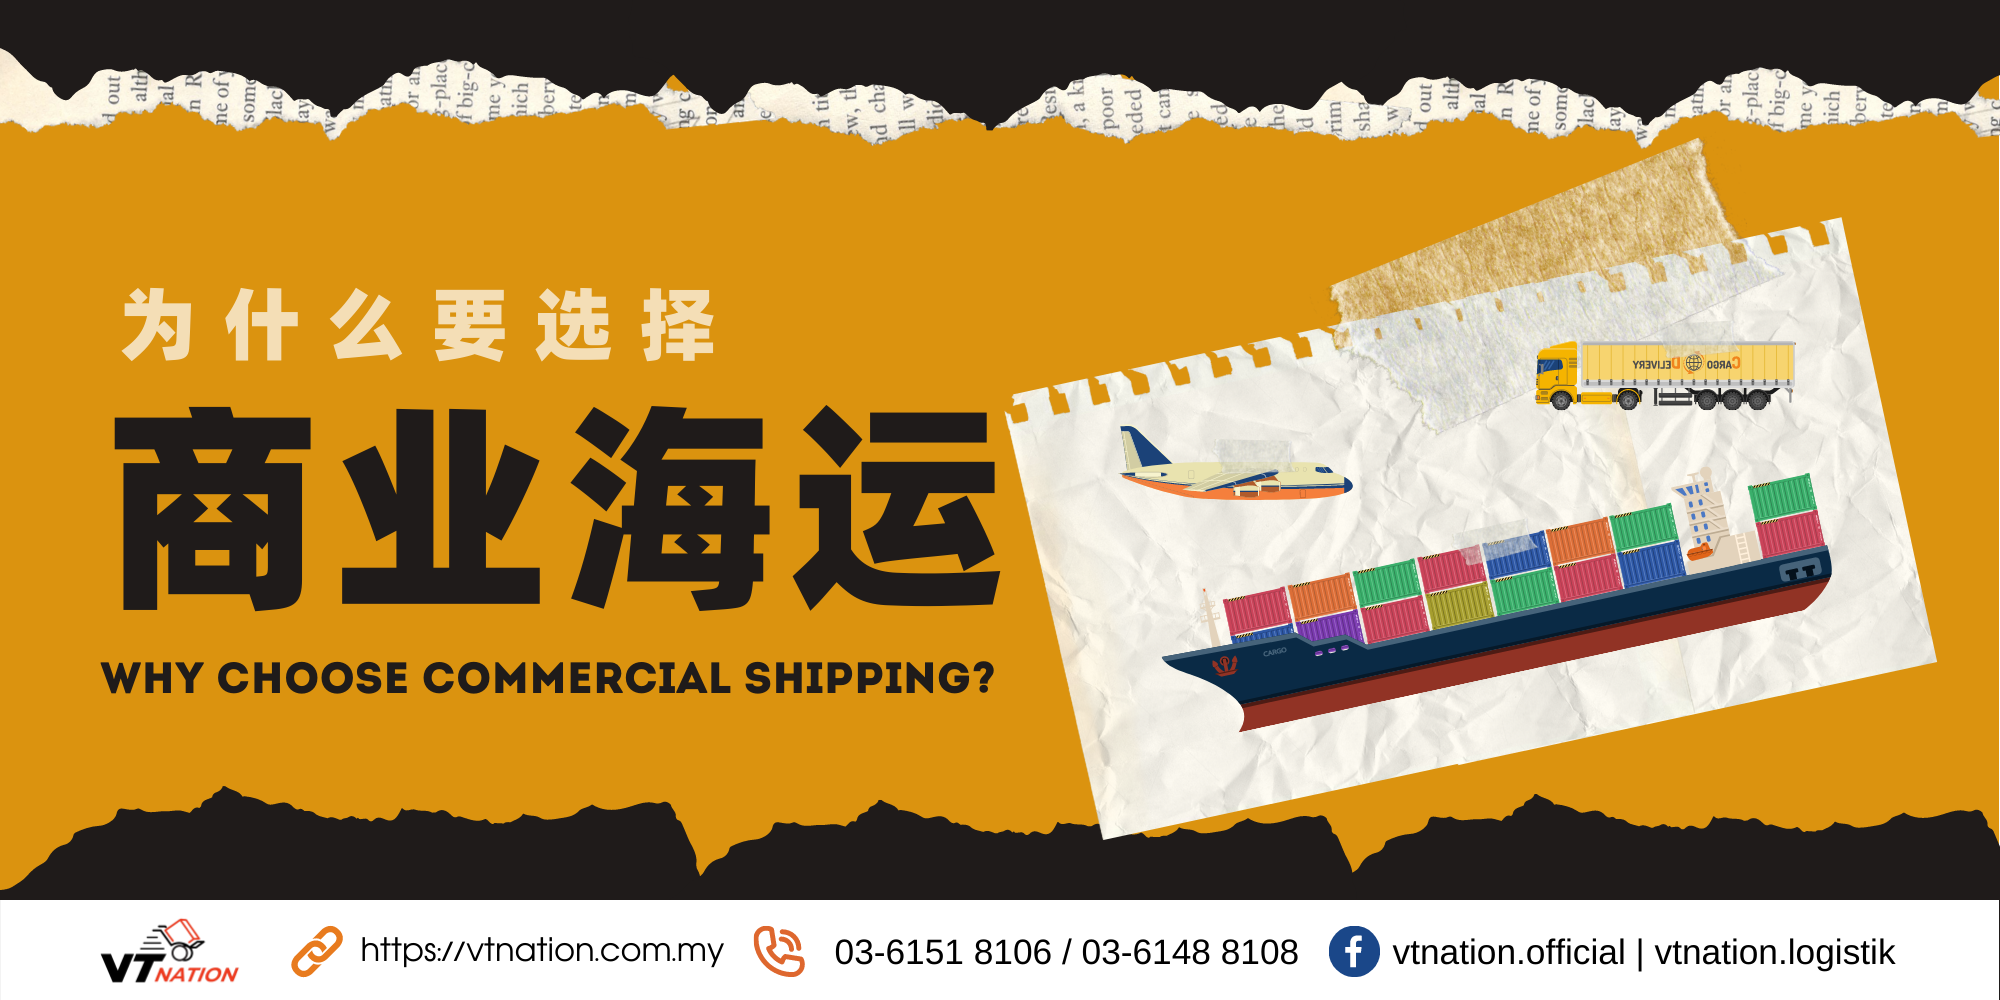 Why choose a commercial shipping company?